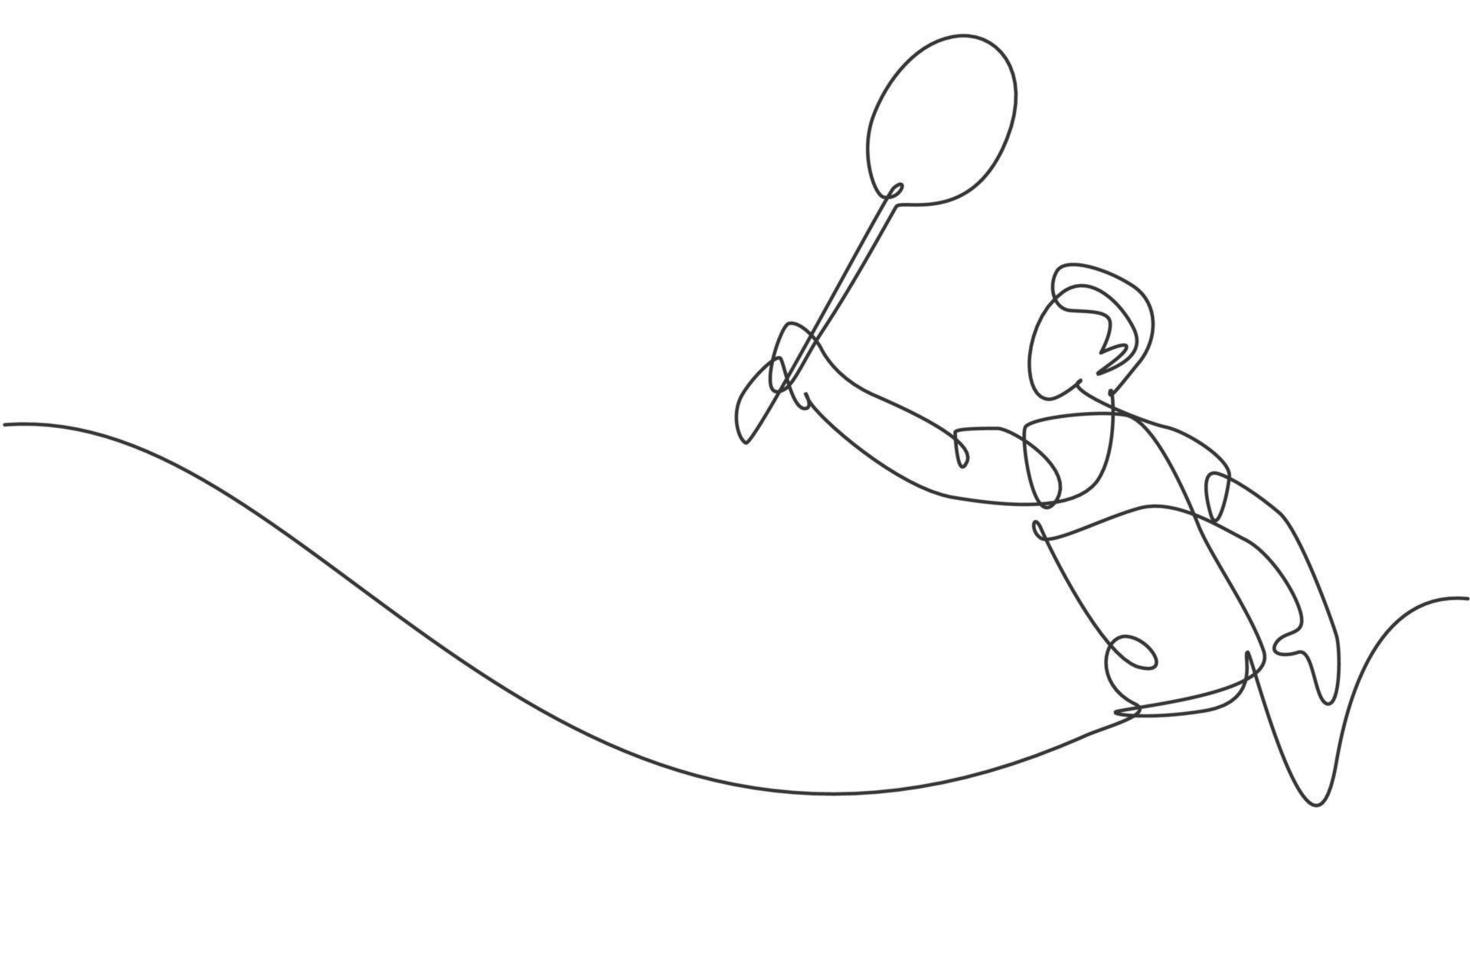 Single continuous line drawing of young agile badminton player hit shuttlecock. Competitive sport concept. Trendy one line draw design vector illustration for badminton tournament publication media